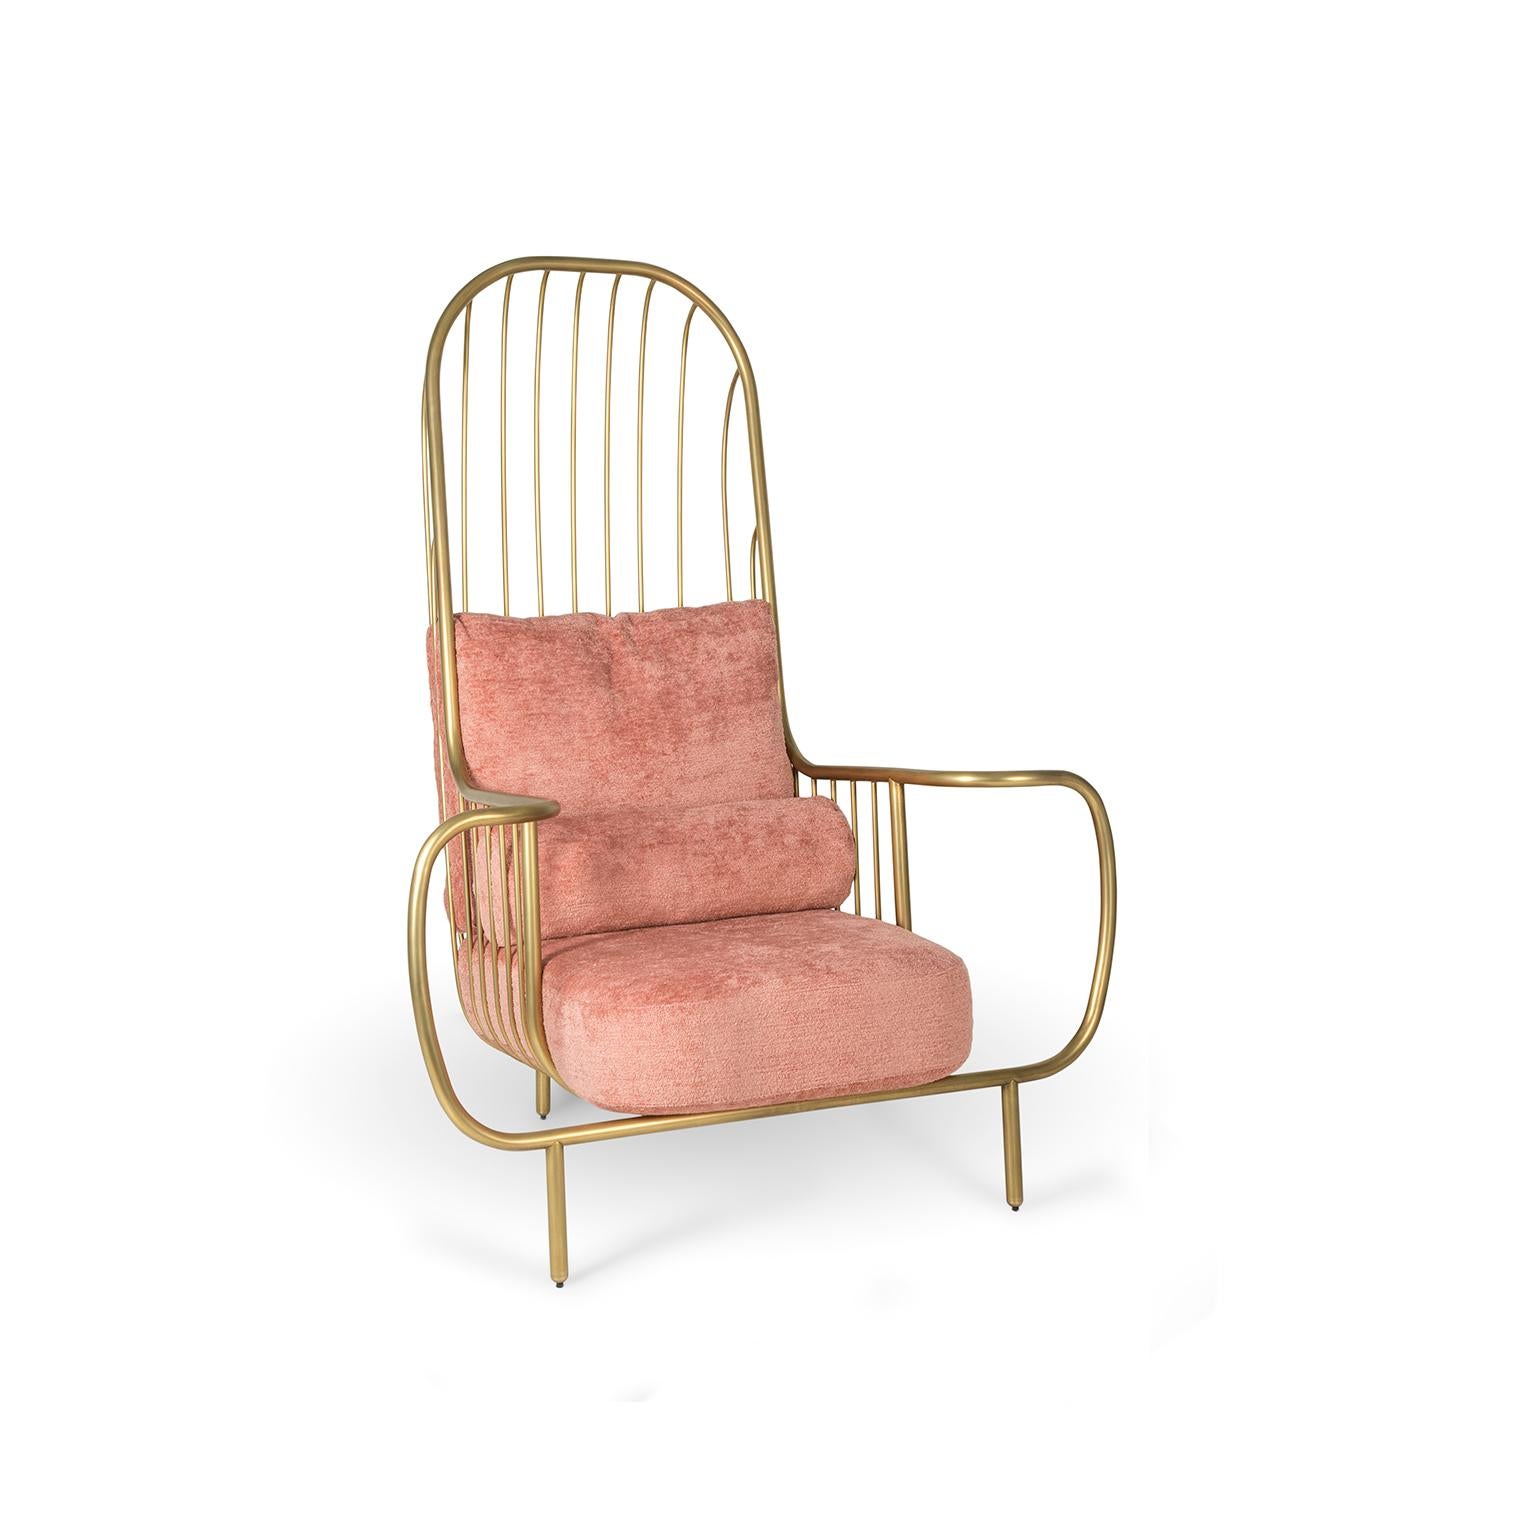 Portuguese Contemporary Modern Liberty Armchair High Back, Aged Brass, Pink Bouclé Cushions For Sale